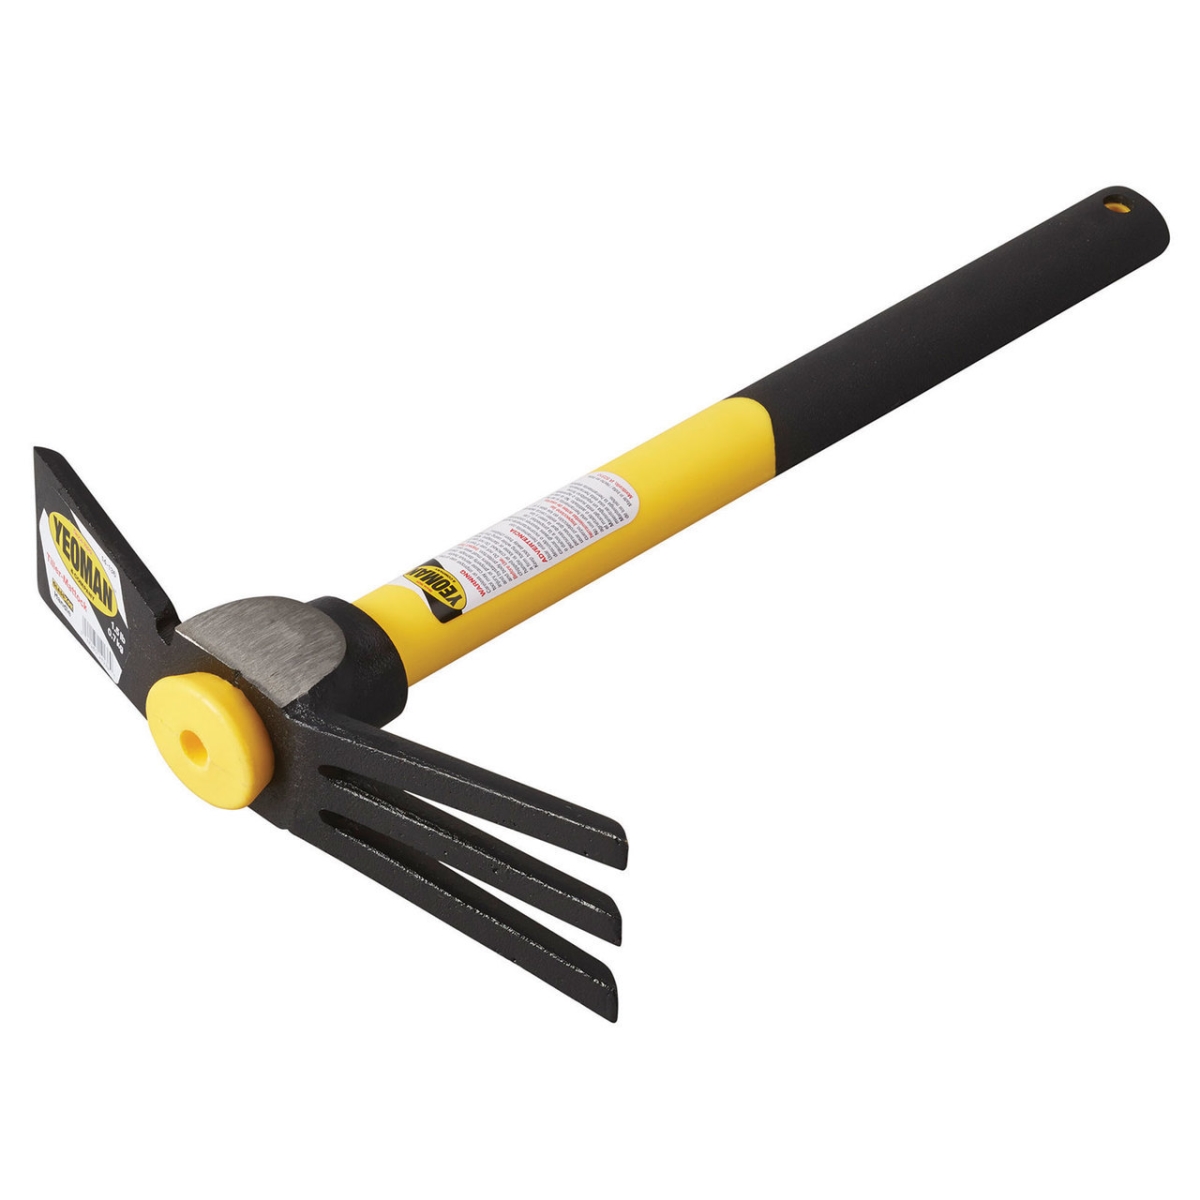 14136 Tilller Mattock 1.5 Lbs With 16 In. Handle